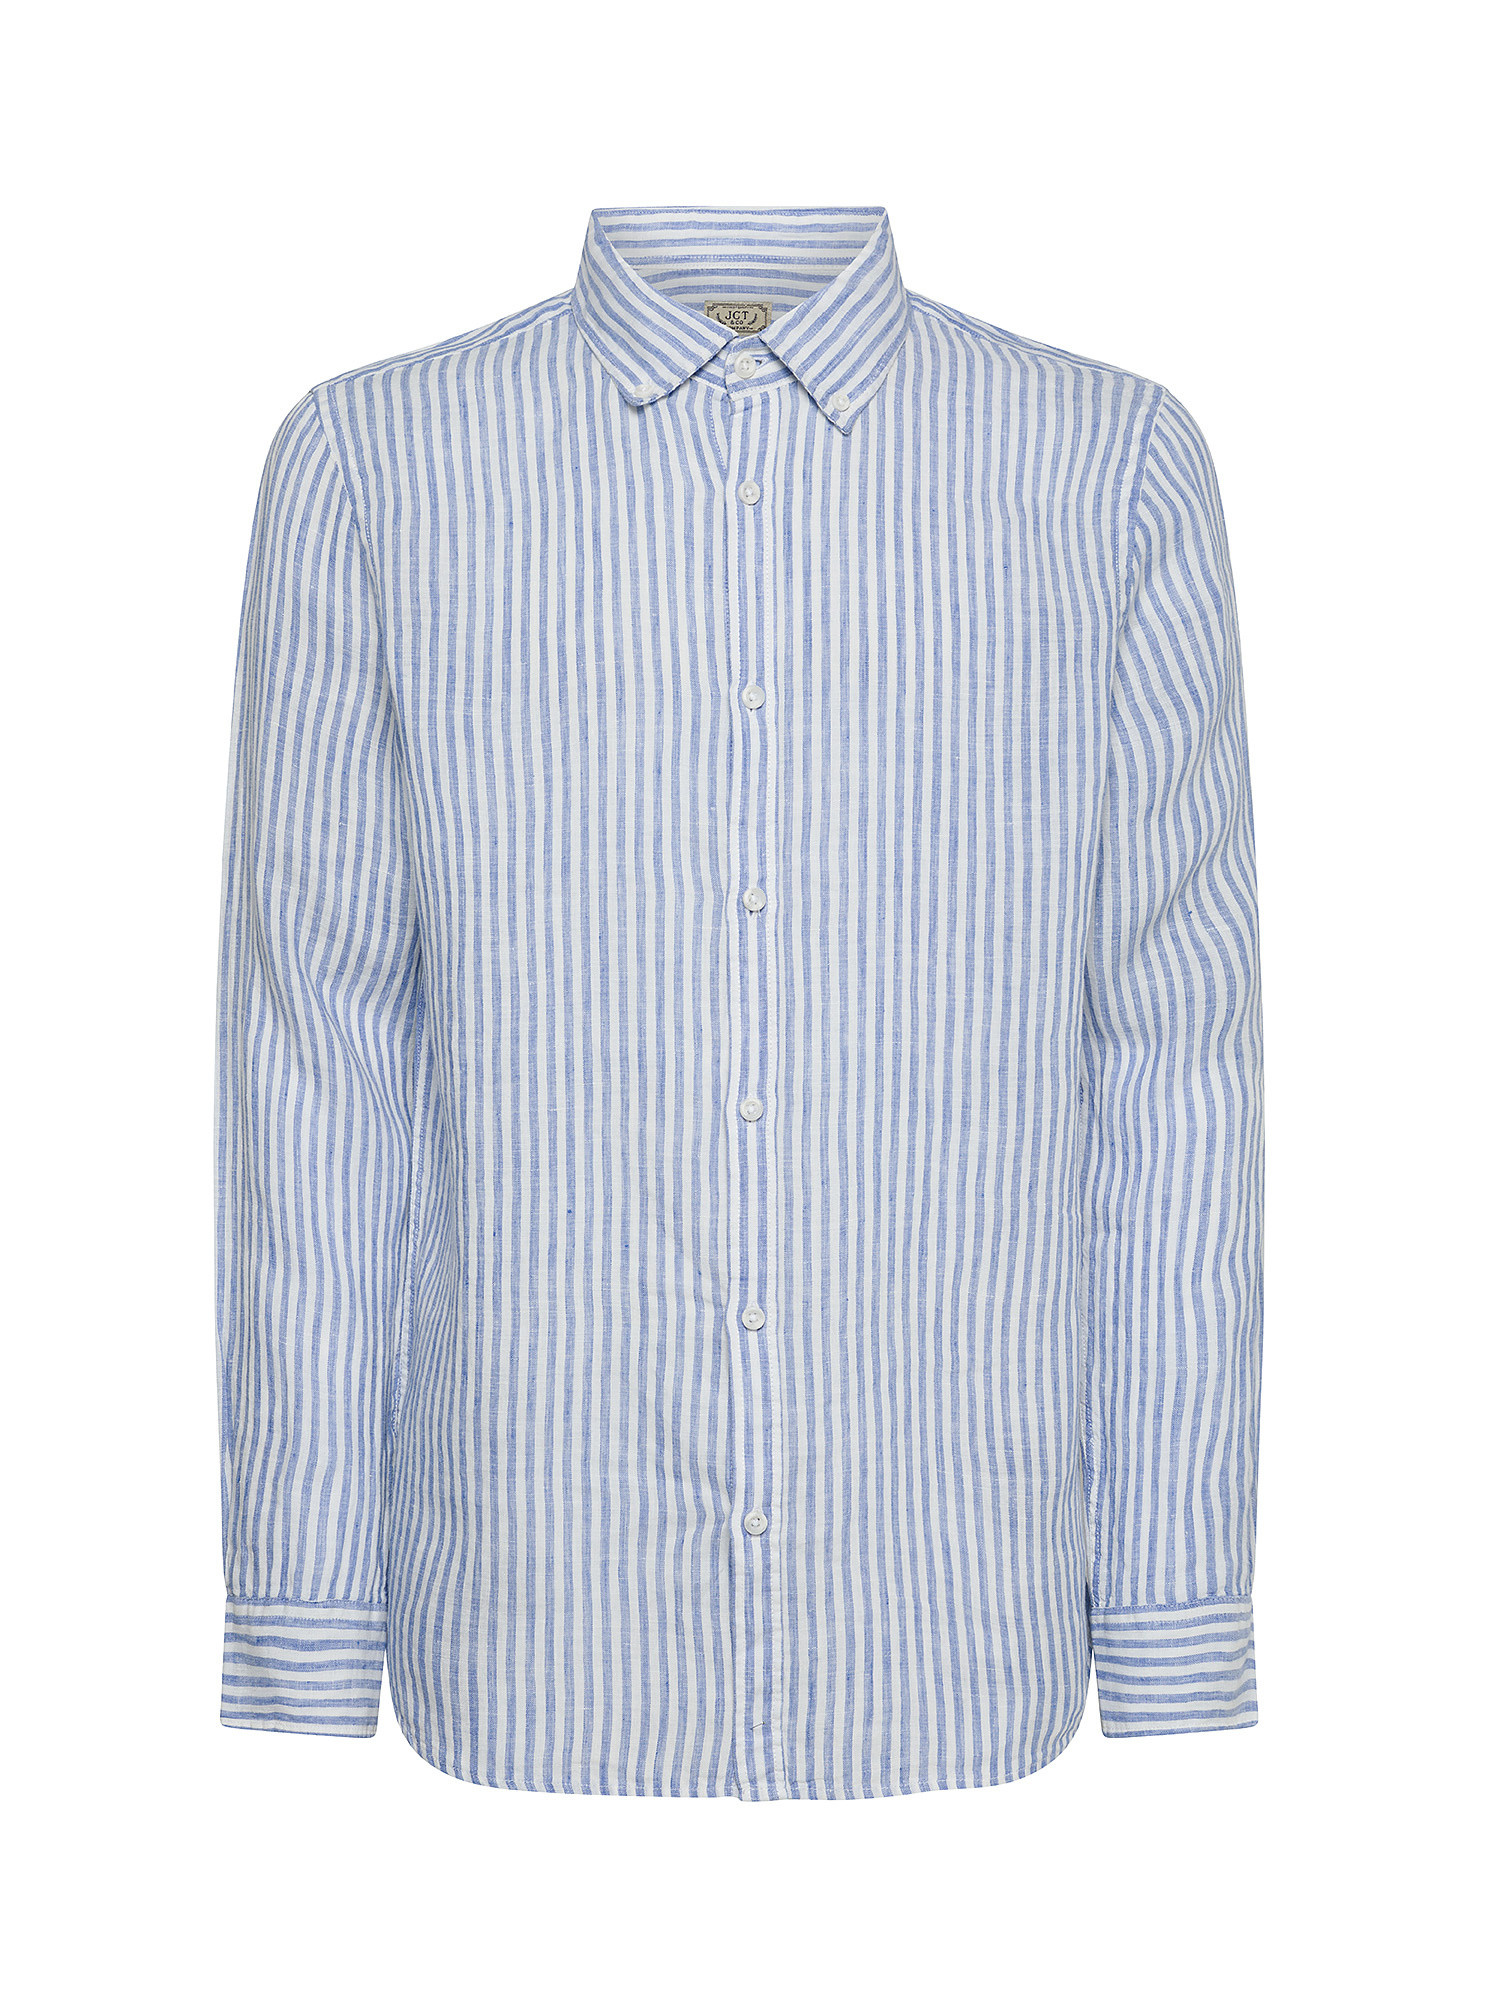 JCT - Striped shirt in pure linen, Light Blue, large image number 0